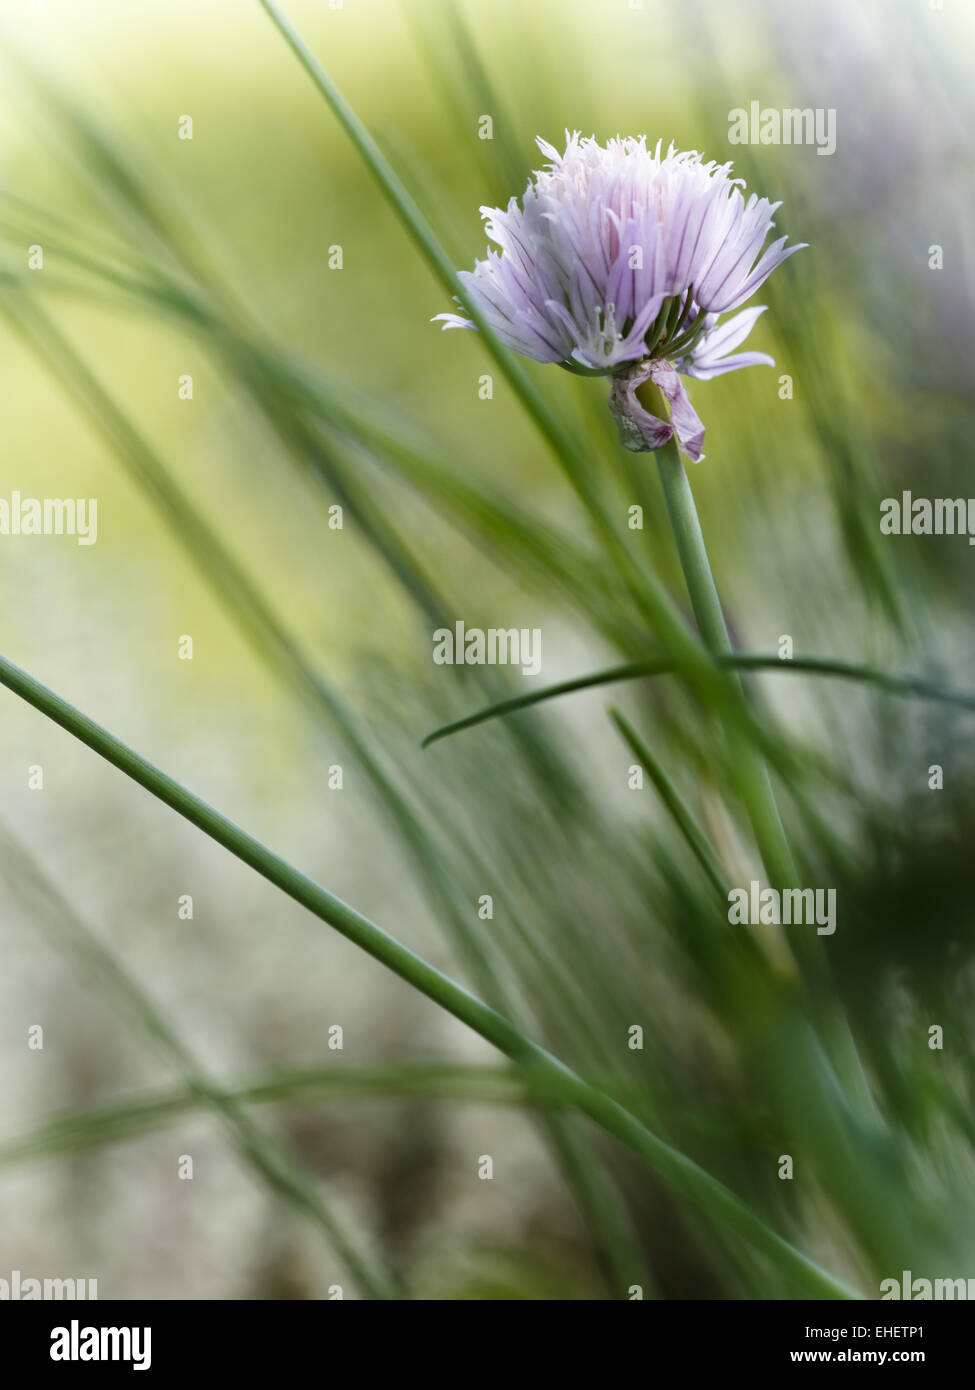 Blooming Chive Stock Photo